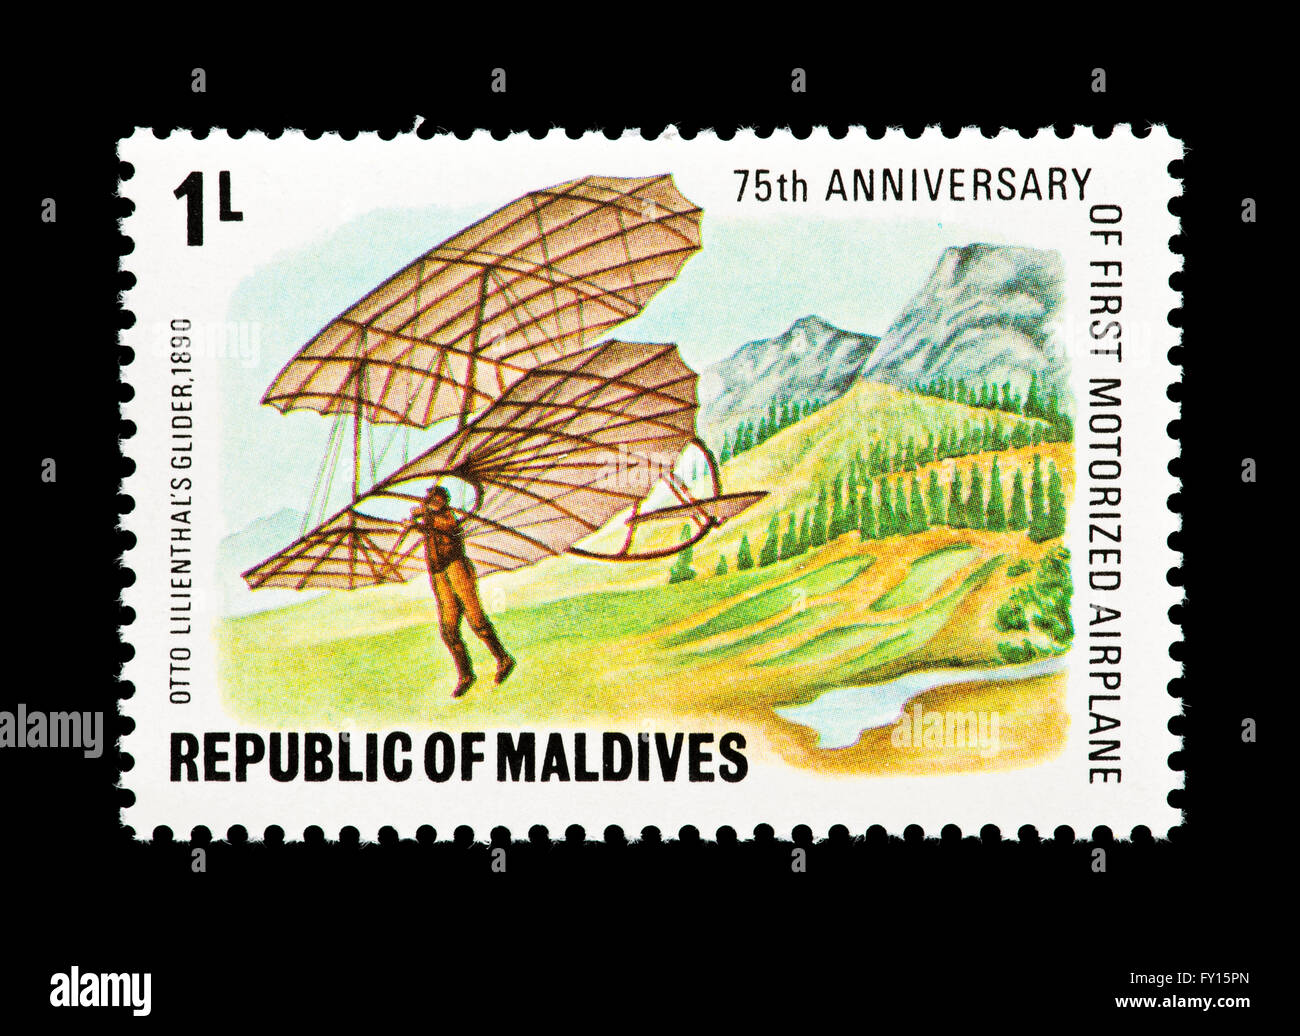 Postage stamp from the Maldives depicting Otto Lilienthal's glider flight in 1890 (75th anniversary powered flight) Stock Photo